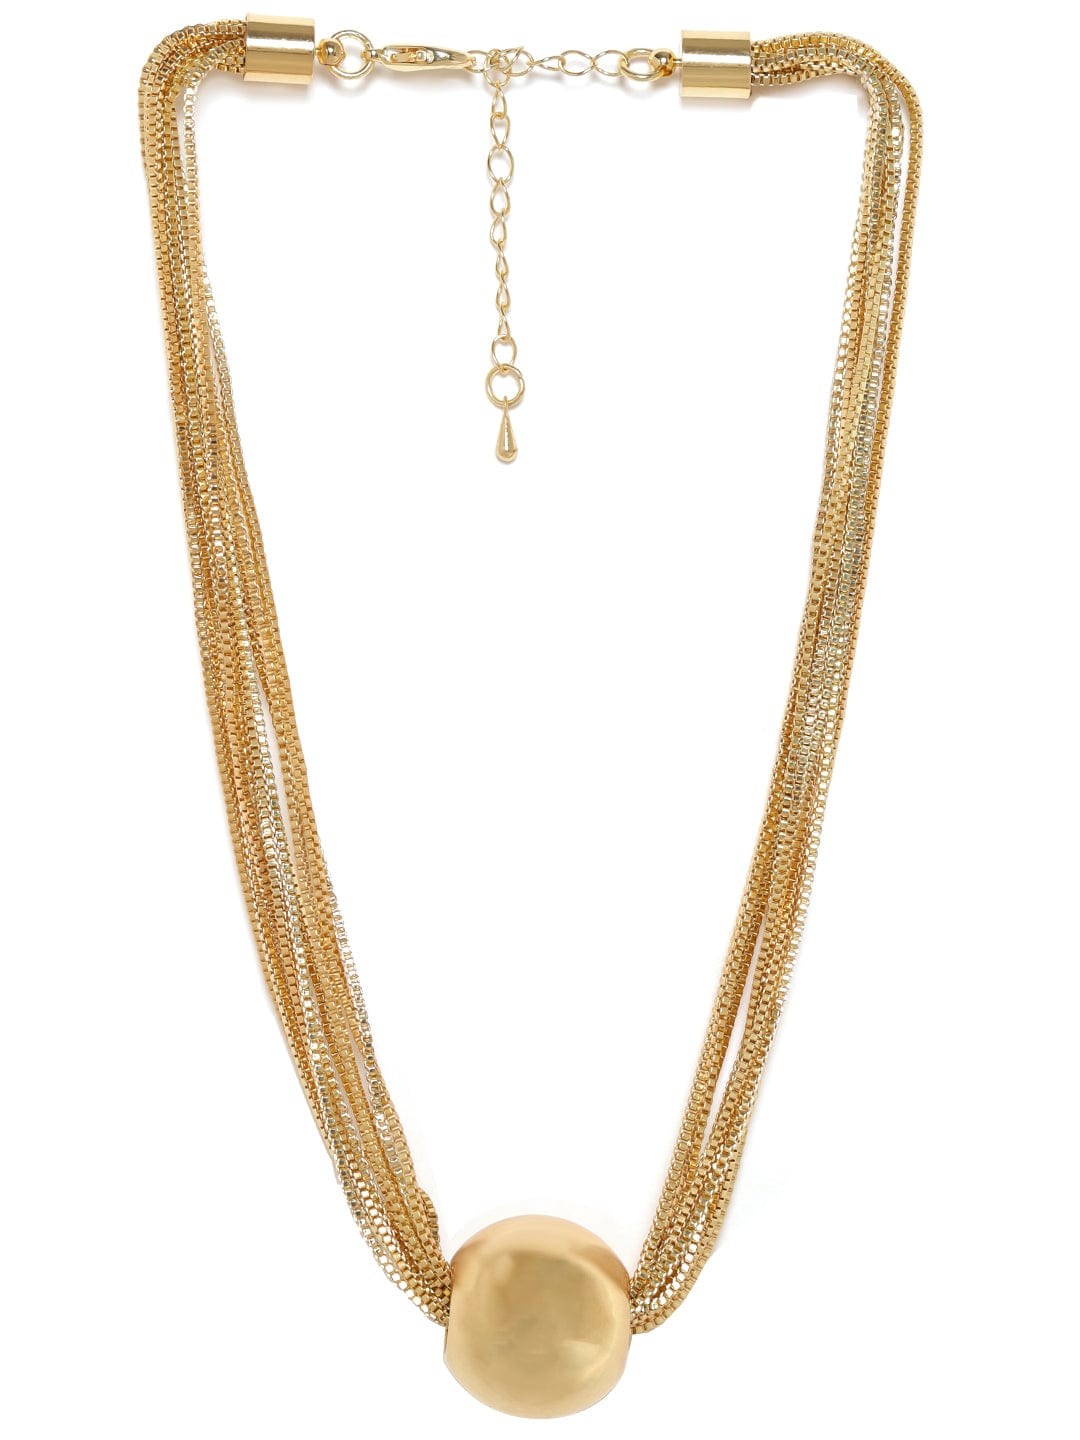 Gold plated multilayered Box chain Ball Charm statement Necklace Necklaces, Necklace Sets, Chains &amp; Mangalsutra